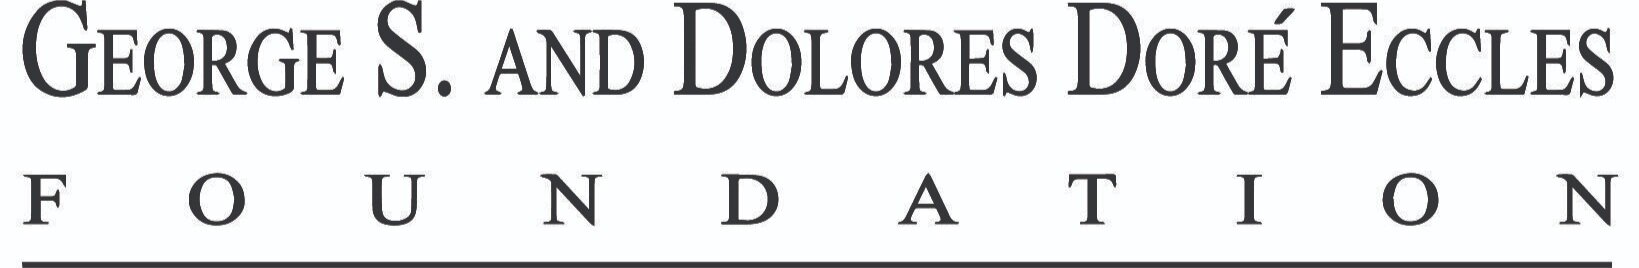 George S. and Dolores Dore Eccles Foundation